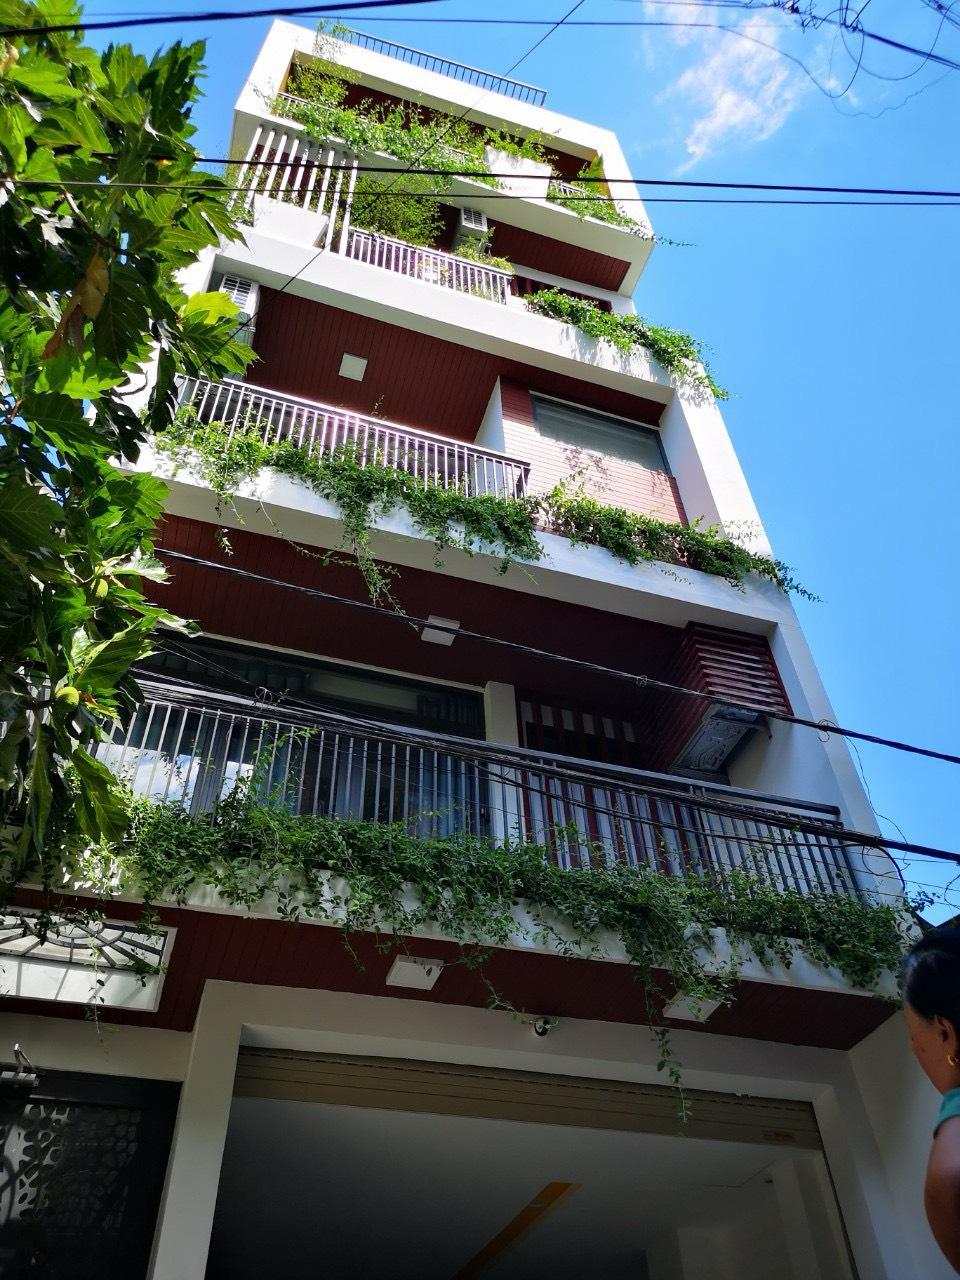 6-story apartment building for sale, beautifully located next to the Beach - Son Tra - Da Nang.